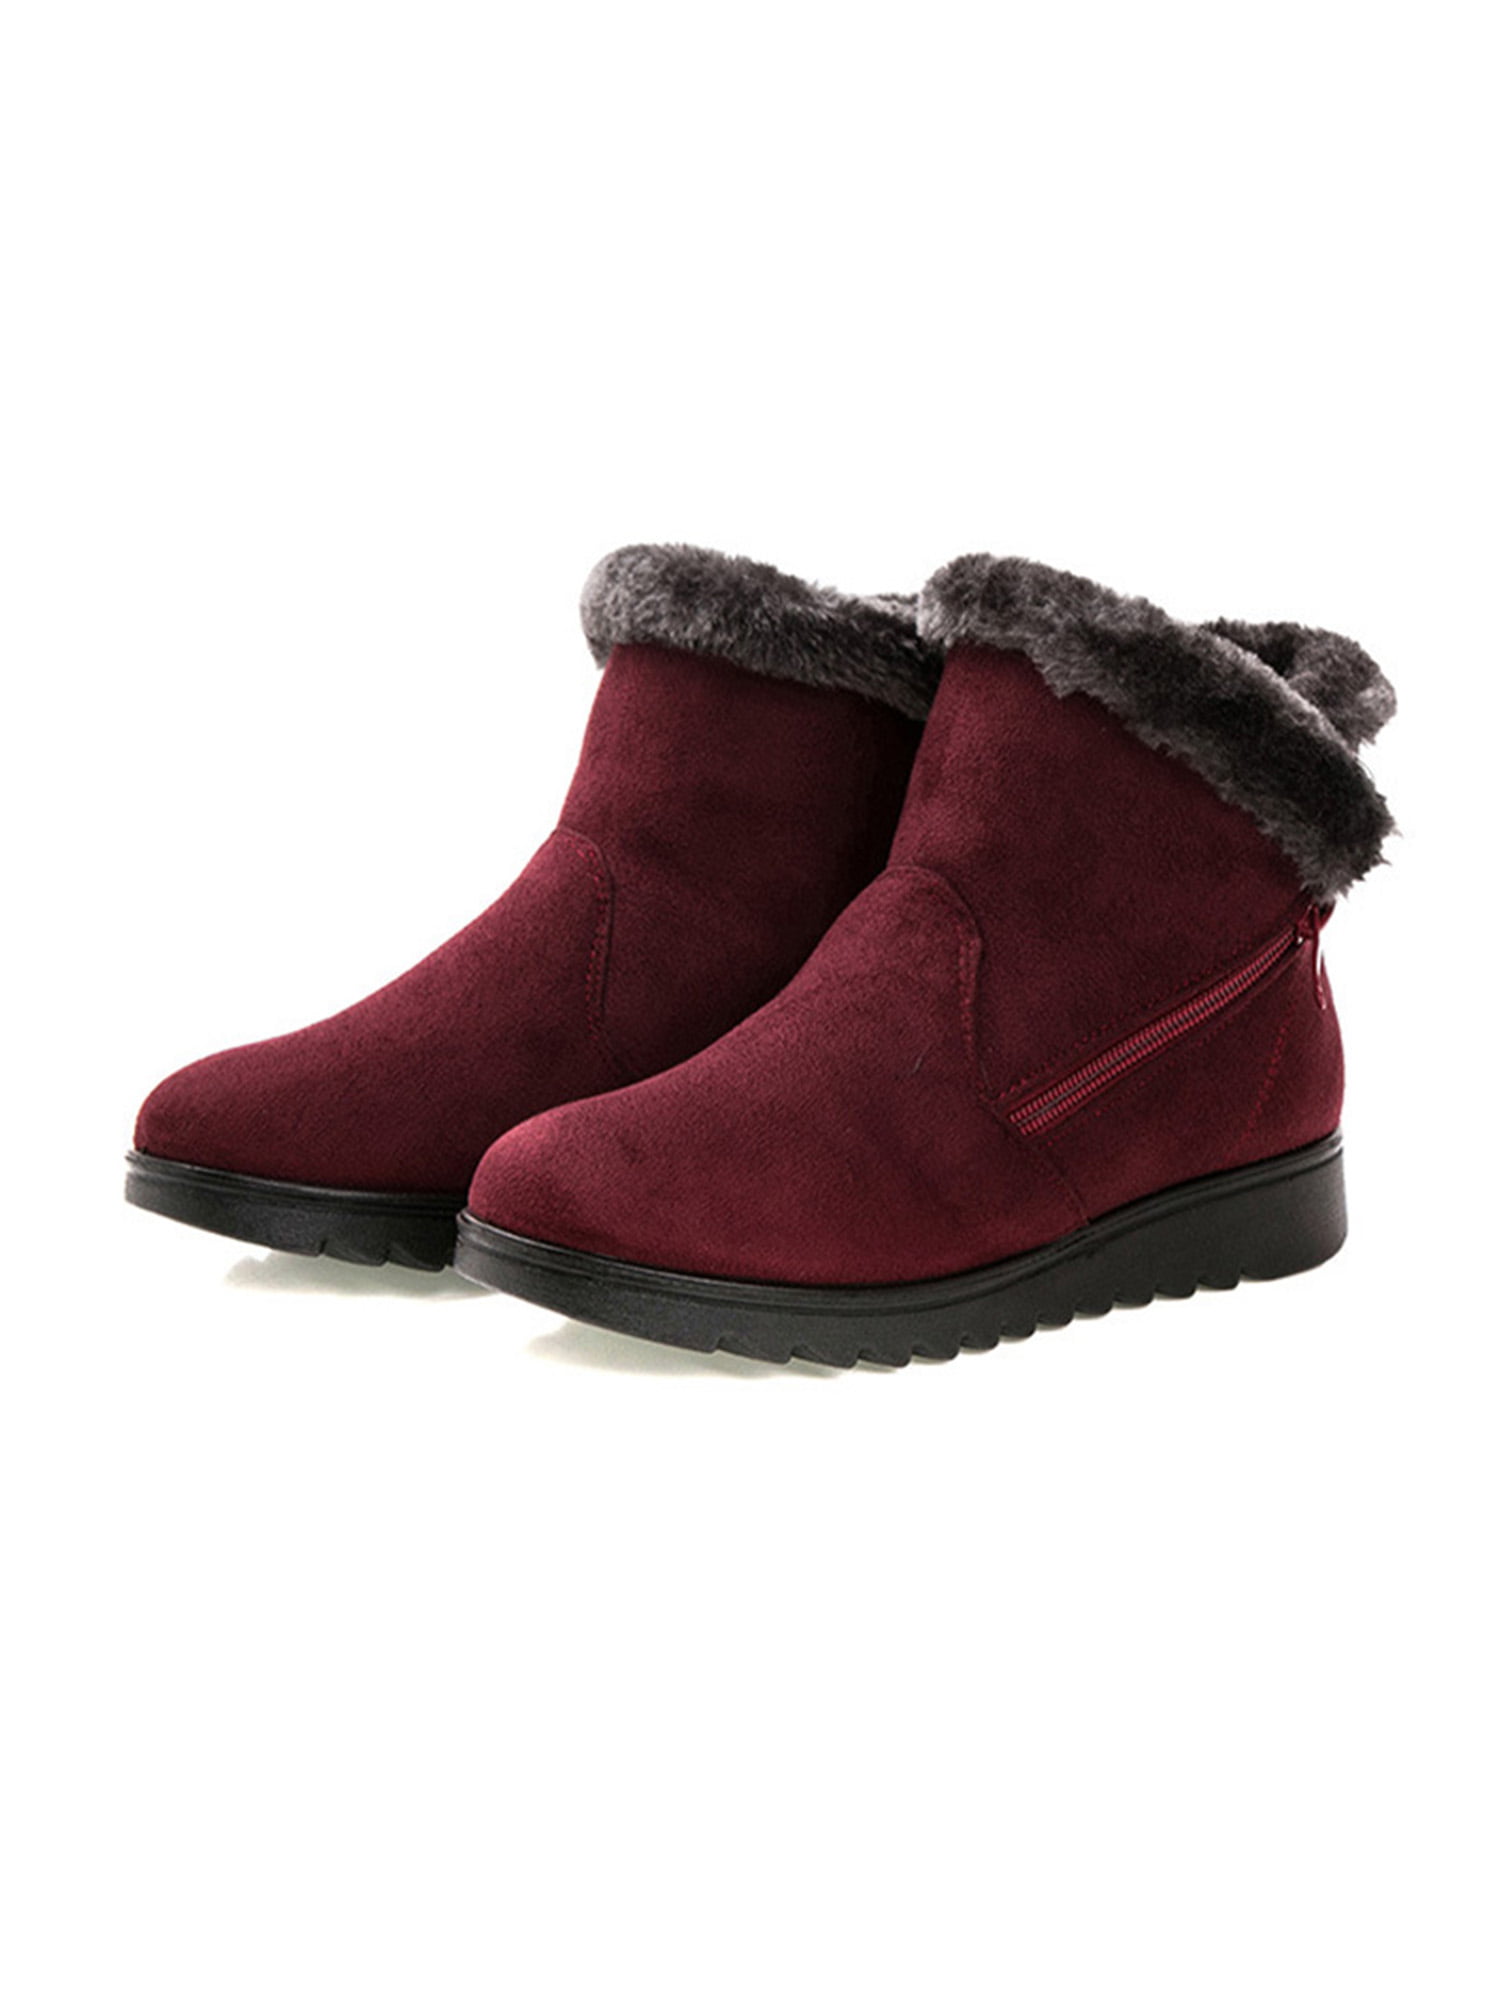 Womens Ladies Warm Fur Lined Snow Ankle Boots Faux Suede Mid-calf Flat Shoes New